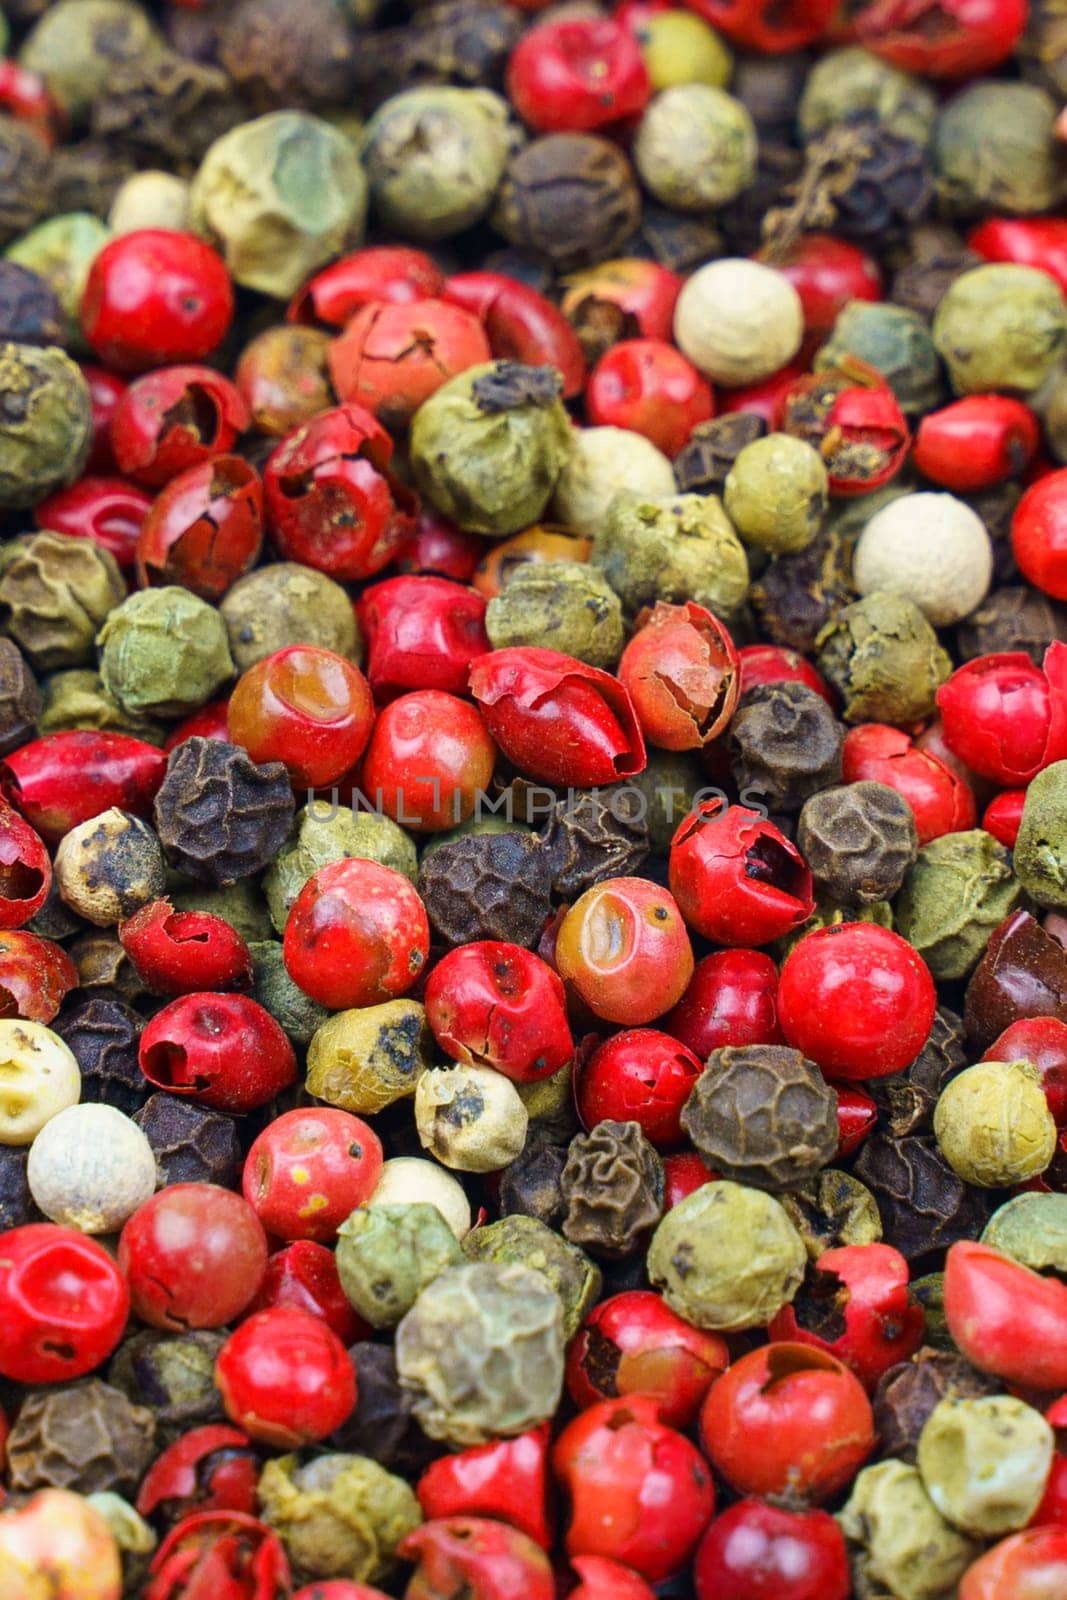 Background image. Top view of a mix of red, green, black, gray and white peppercorns. Vertical frame.